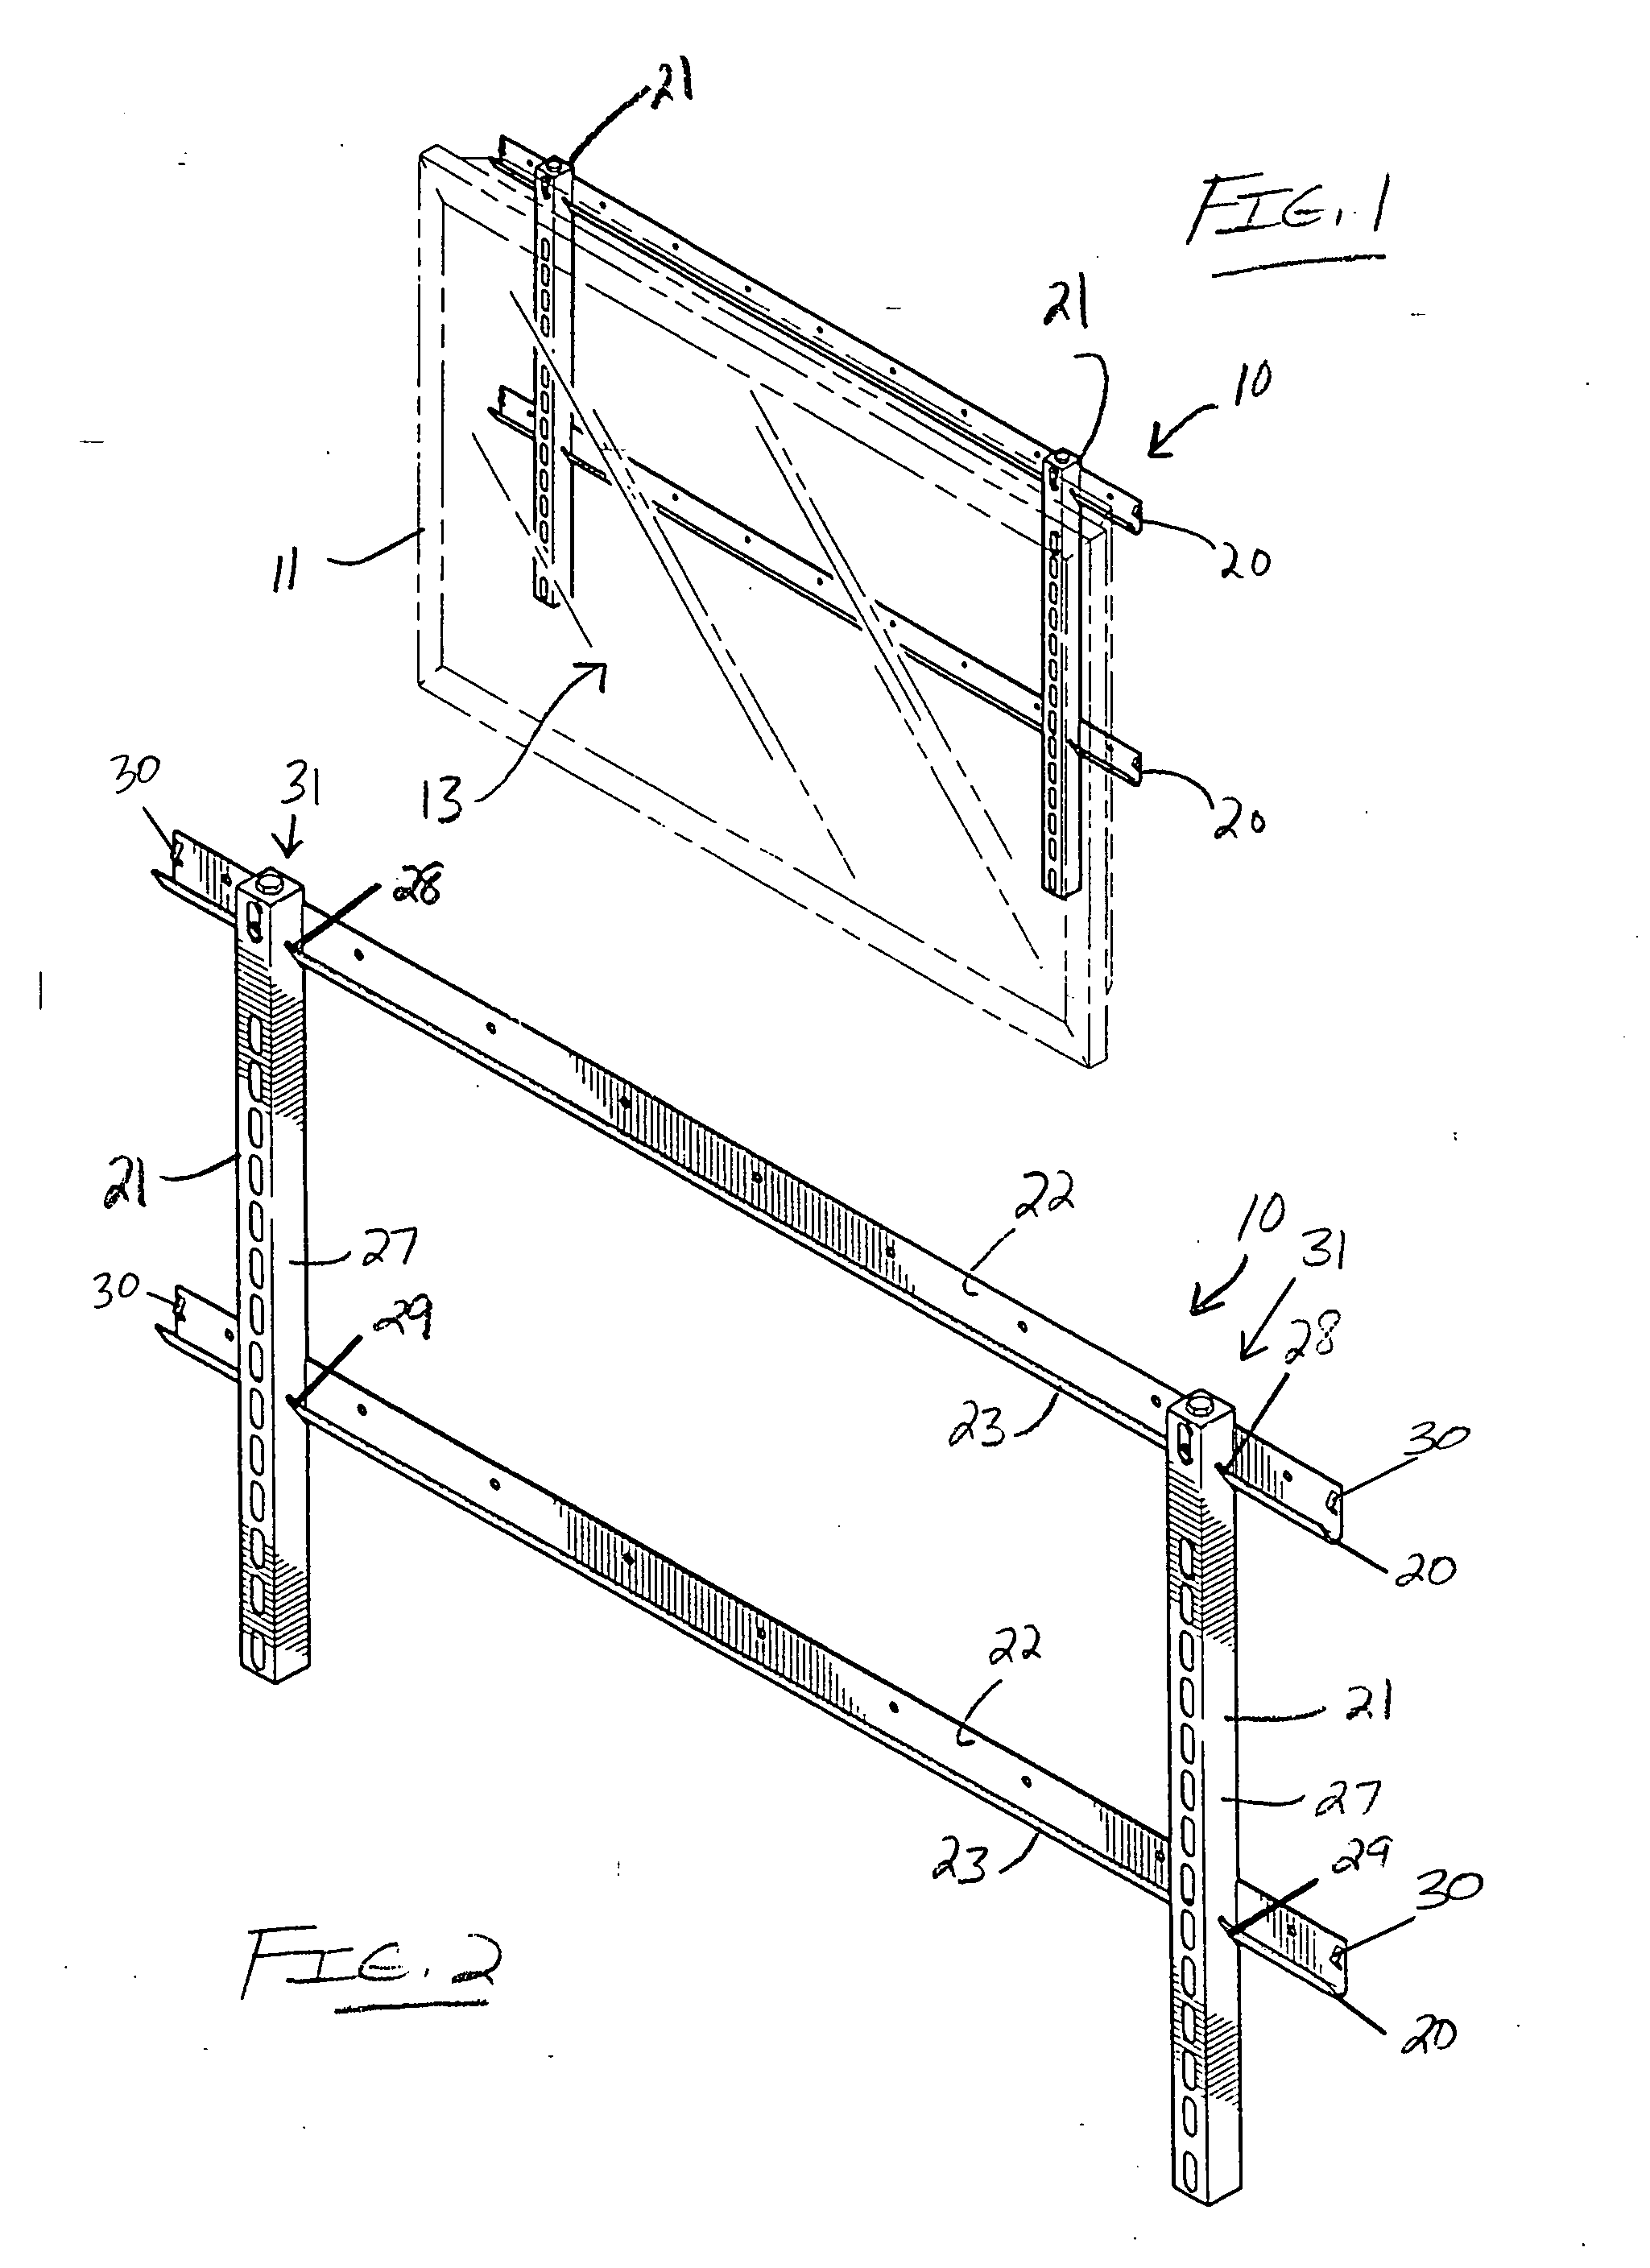 Flat panel television mounting assembly, and method